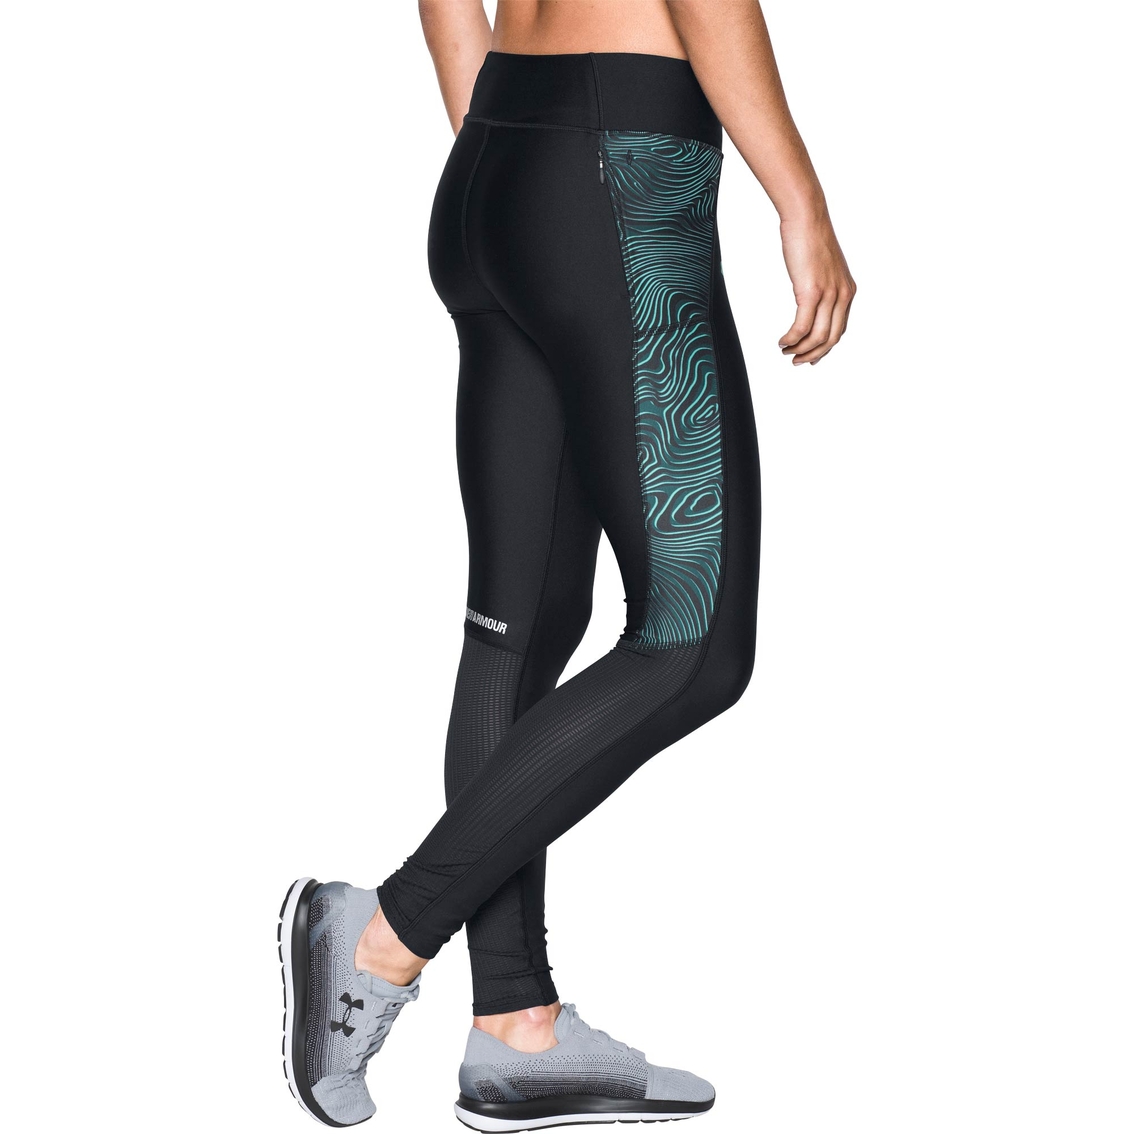 Under Armour Women's UA Fly-by Printed Leggings Black/White/Reflective Pants  XL (US 16) X 28